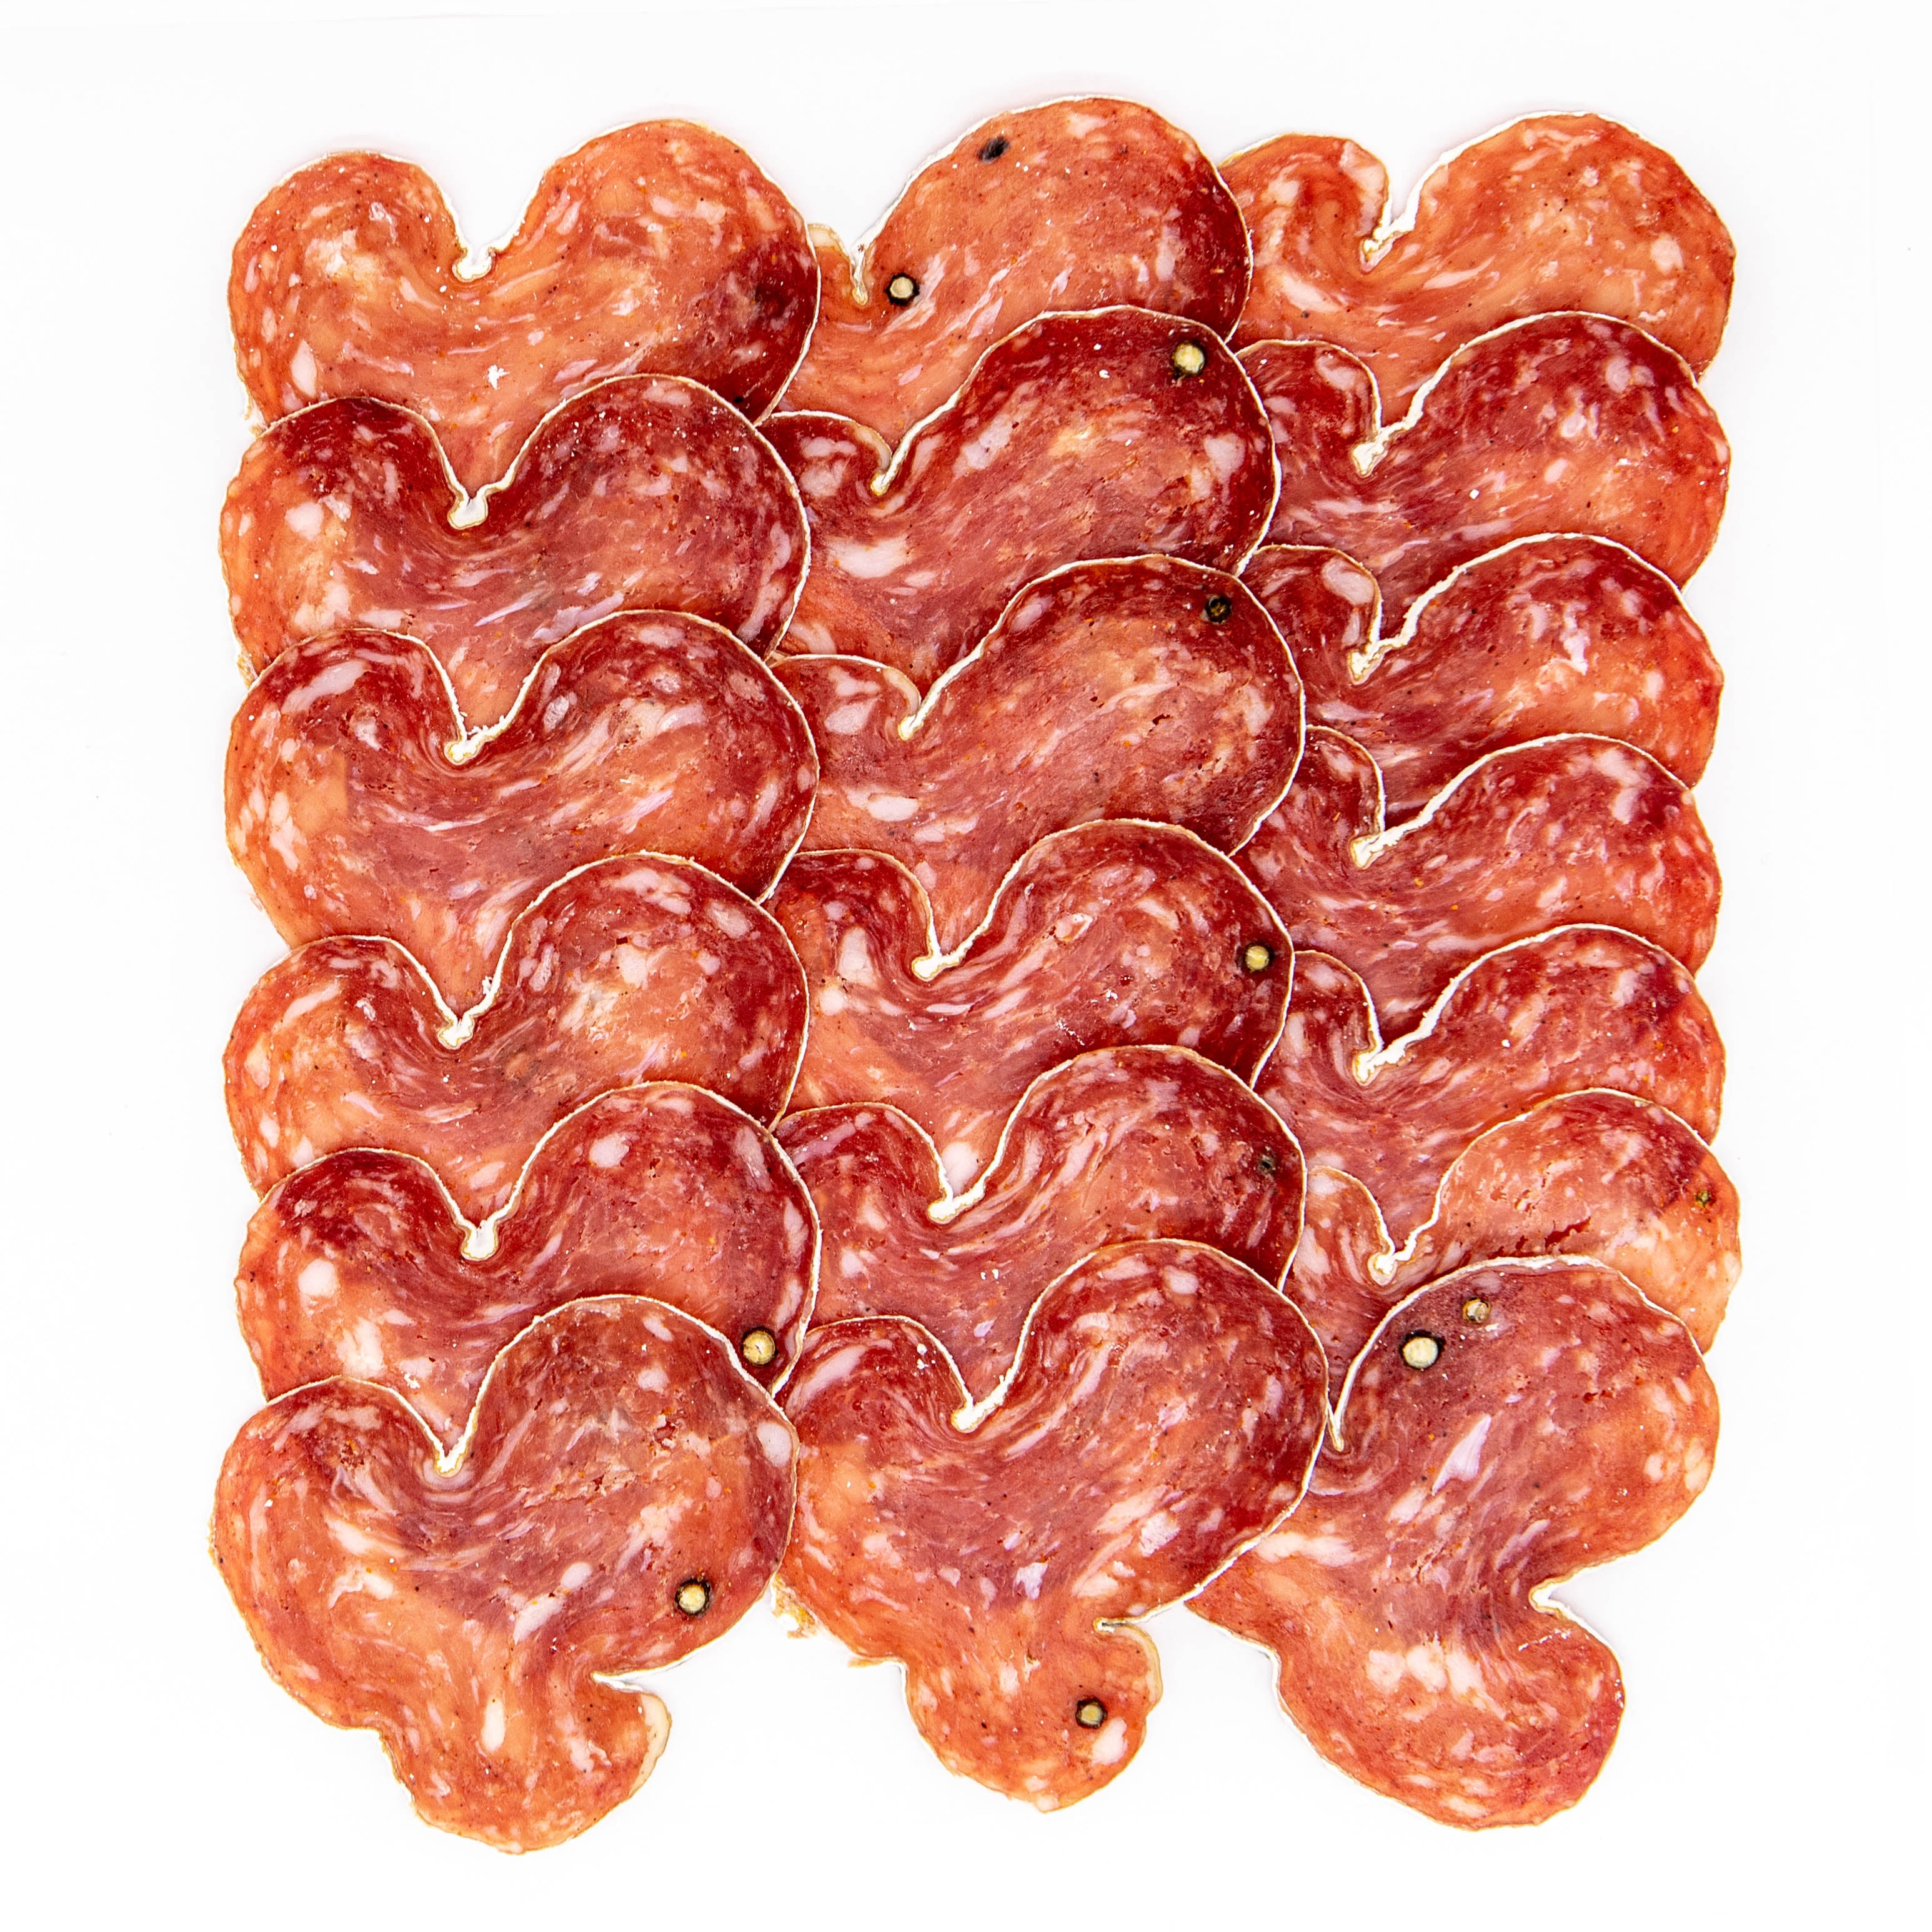 Jésus Sausage from Basque.